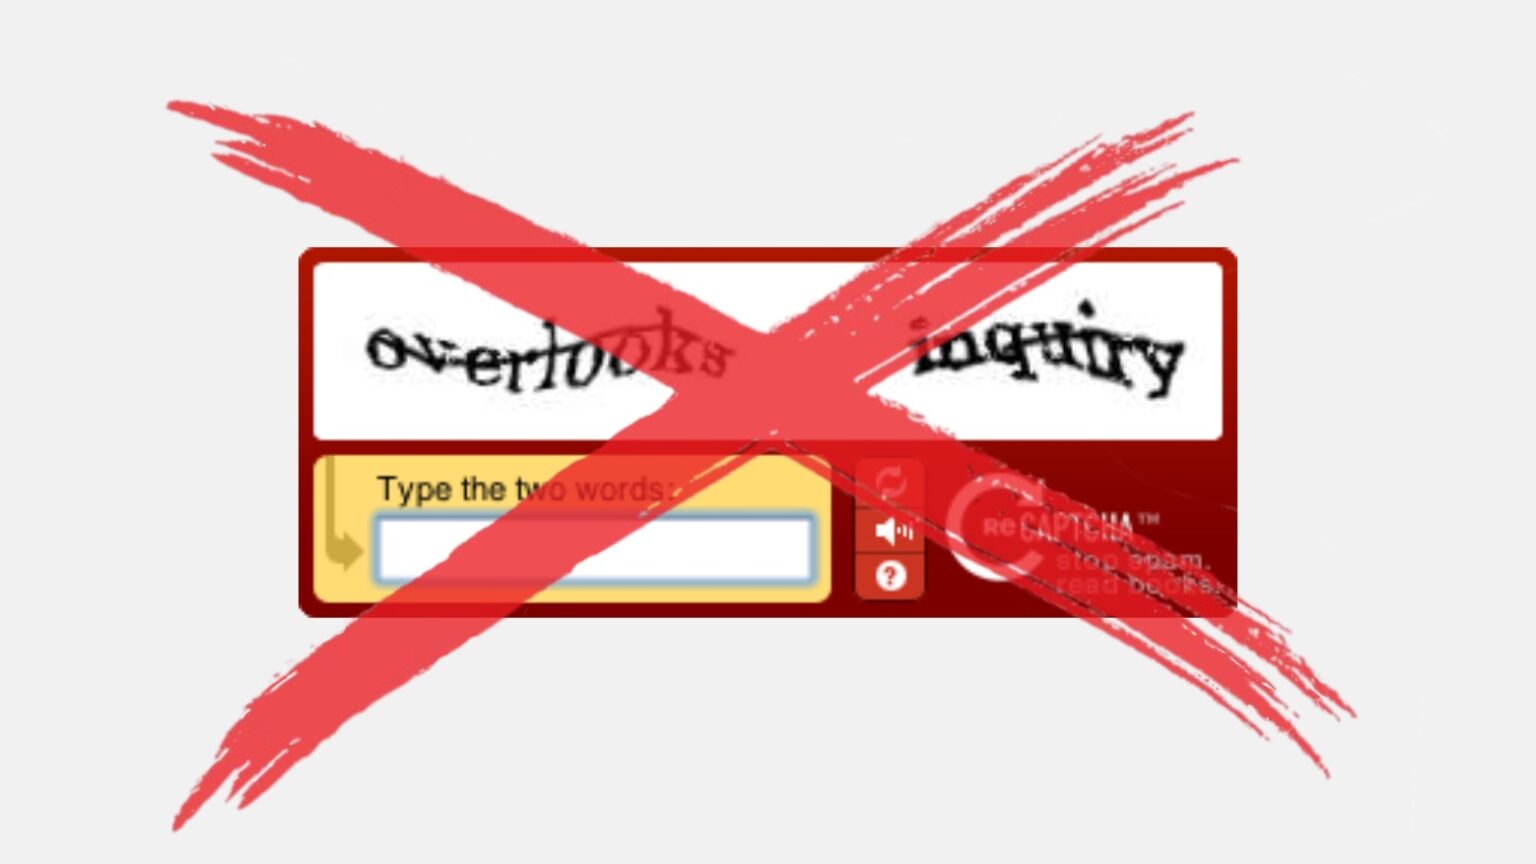 Apple Automatic Verification will help save us from CAPTCHA hassles